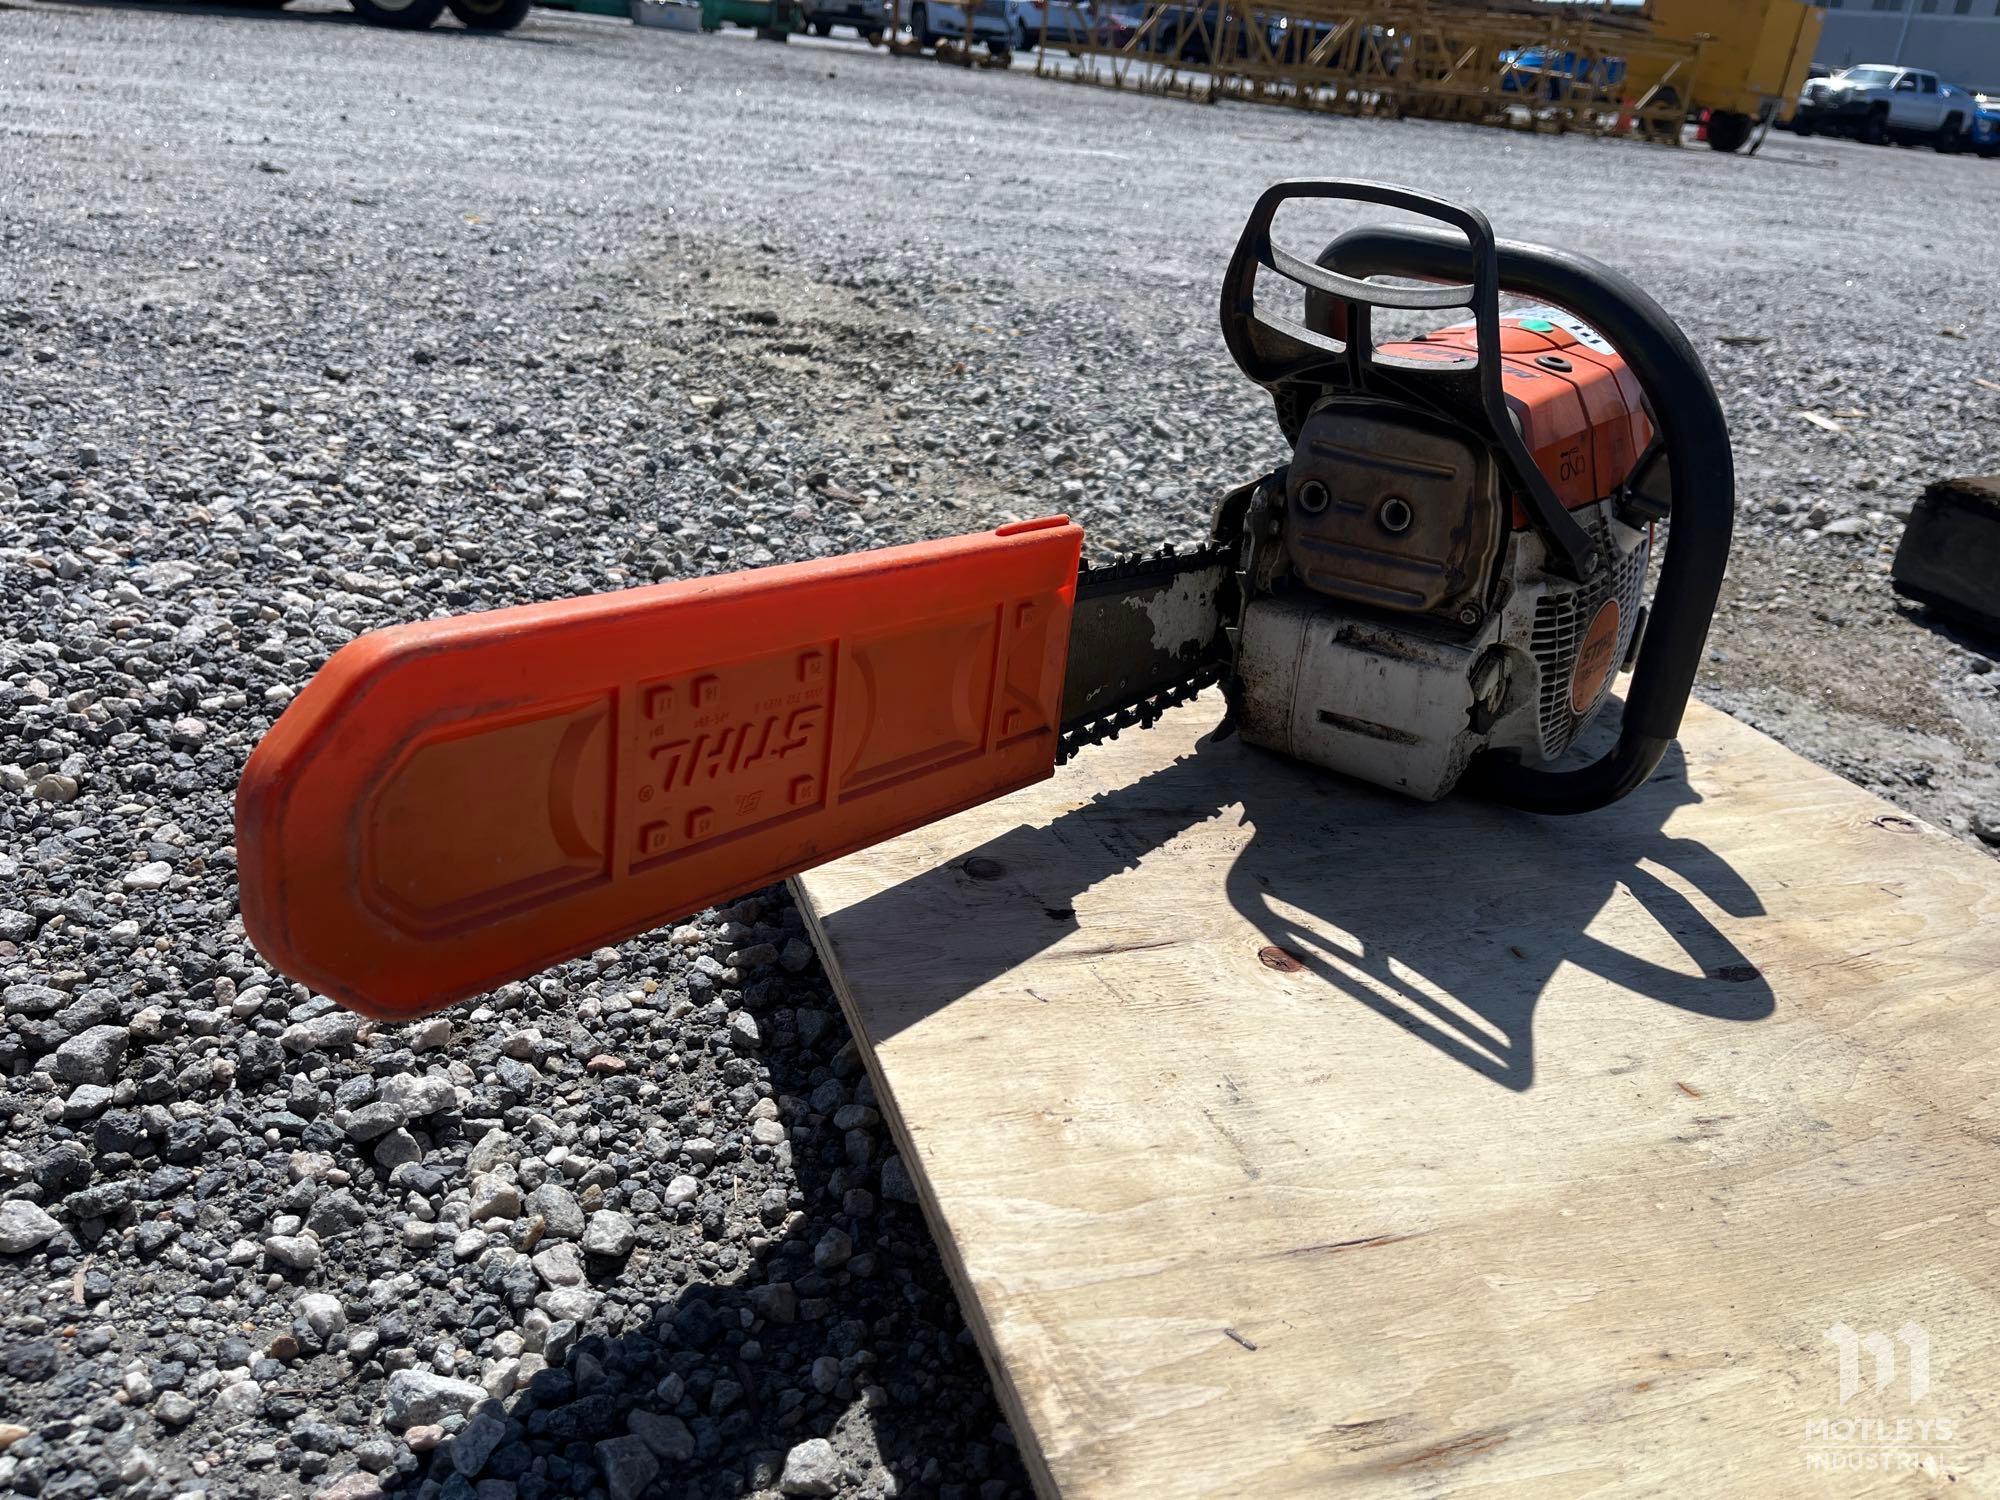 2013 Sthil MS441 Chainsaw